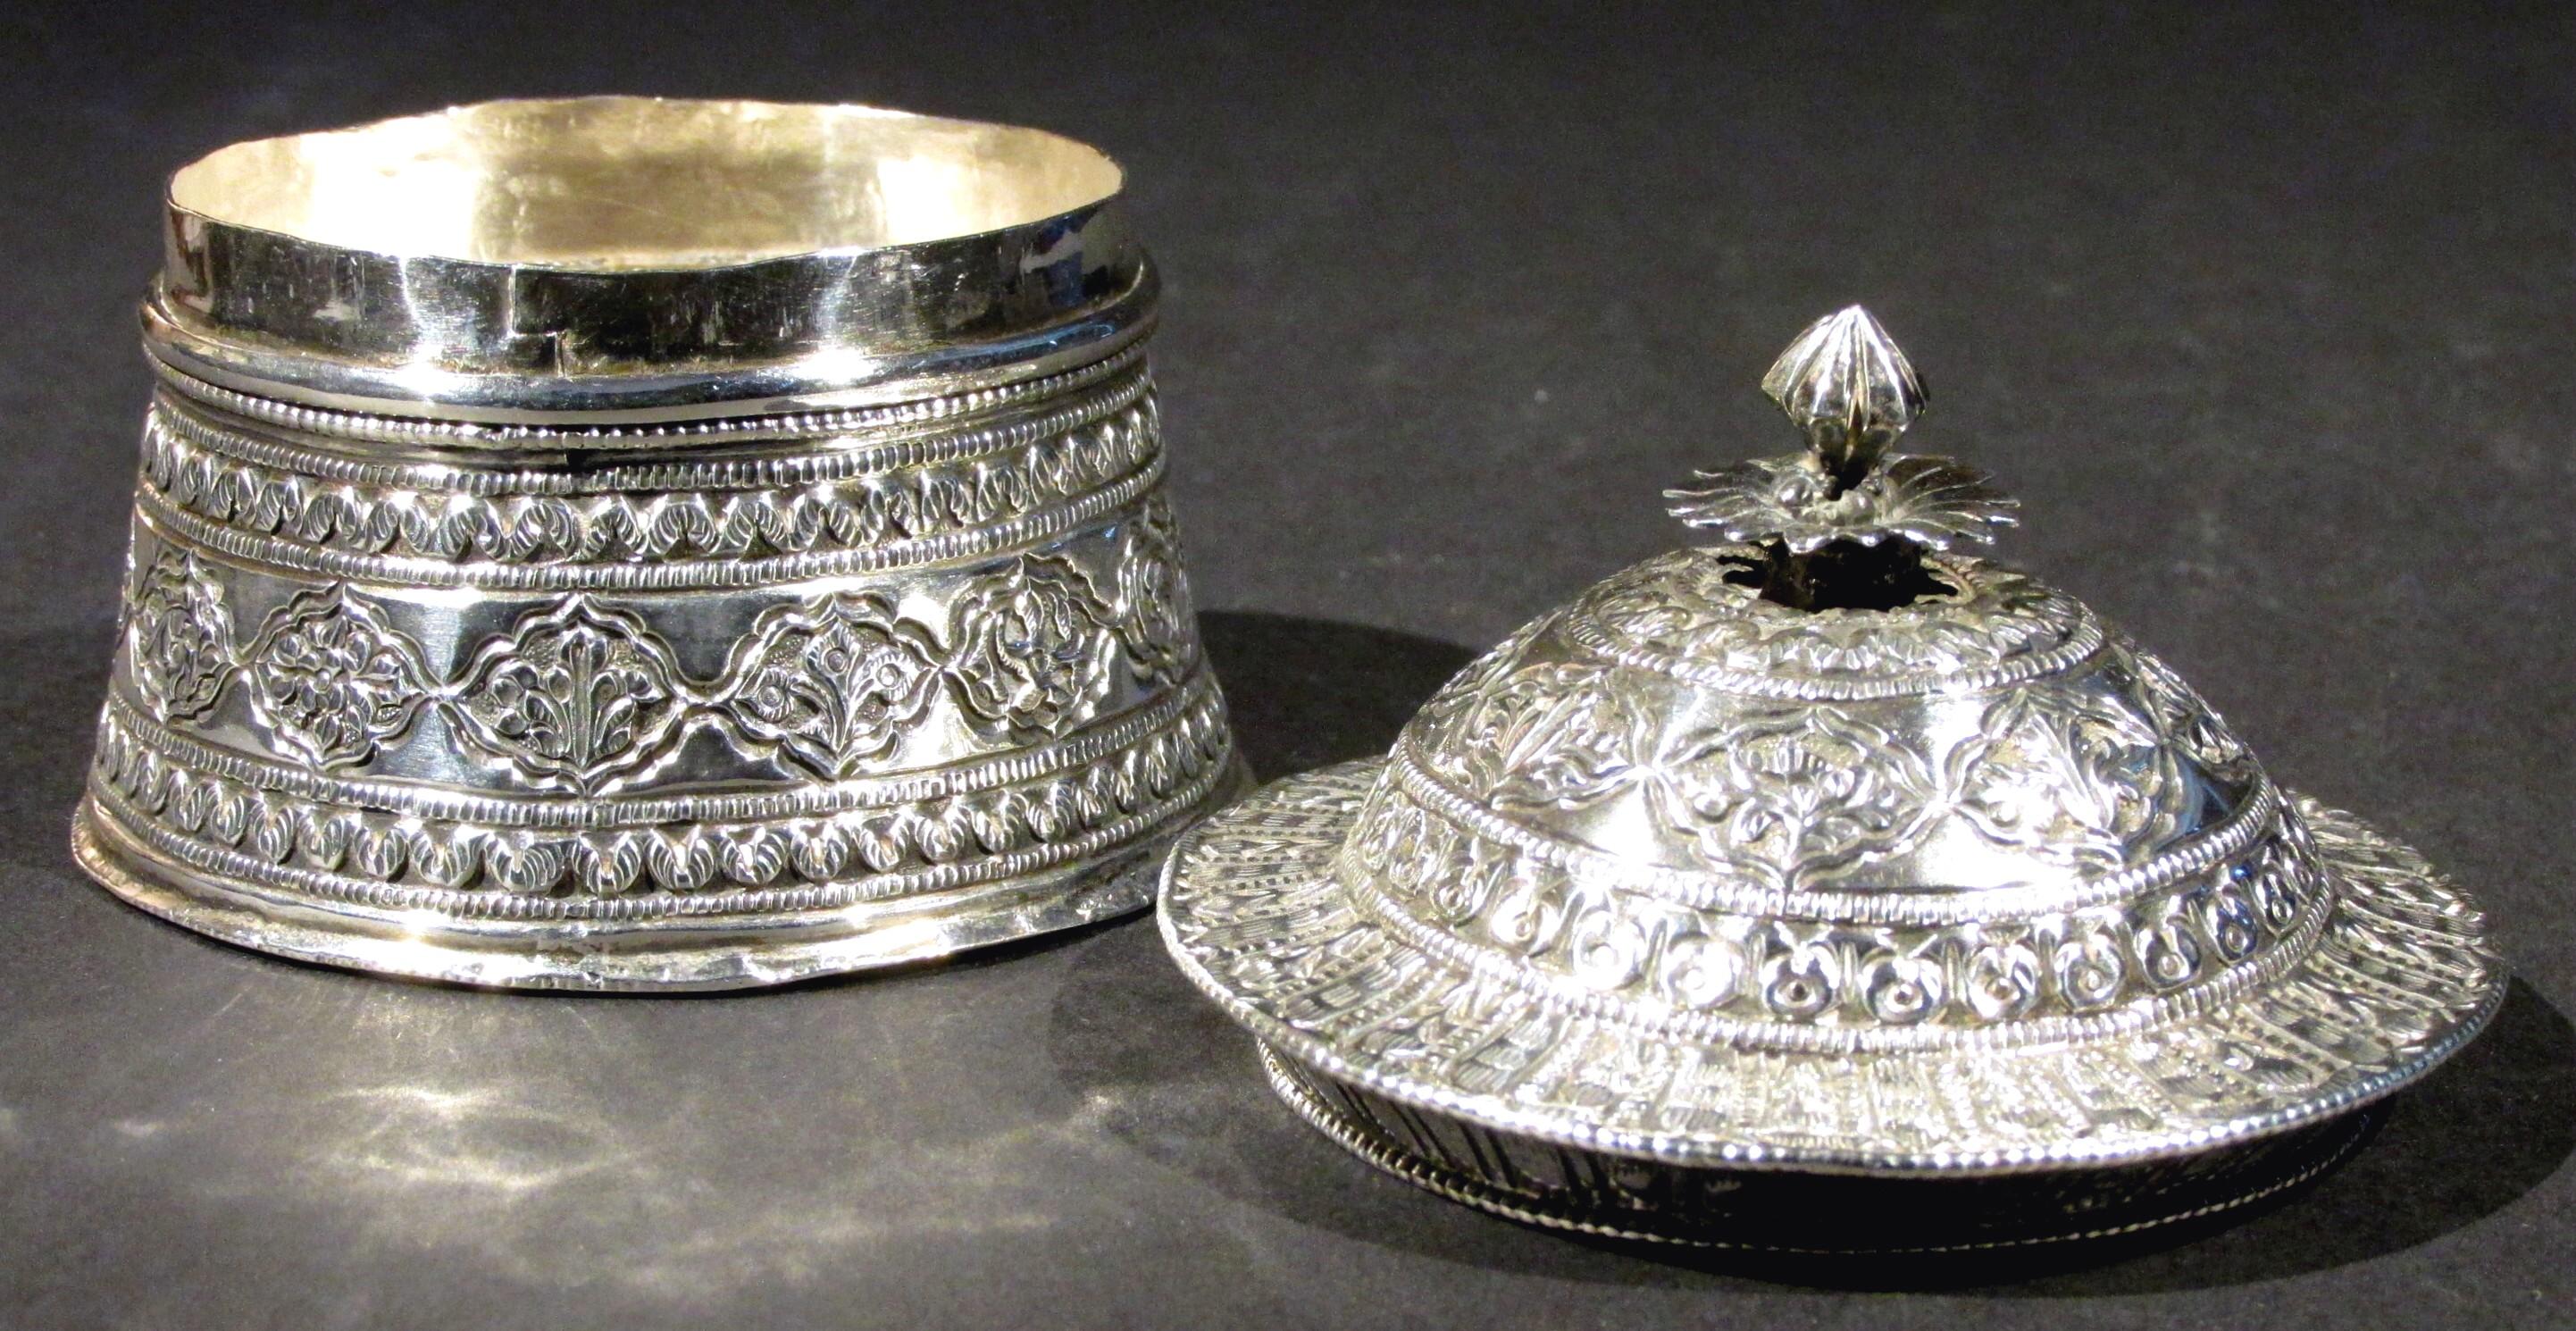 Intended to hold paan or betel, the seamed cylindrical body flaring downward towards the base, the domed lid showing a lotus-bud final over a flattened and canted rim, both decorated overall with repeating bands of hand embossed & chased geometric